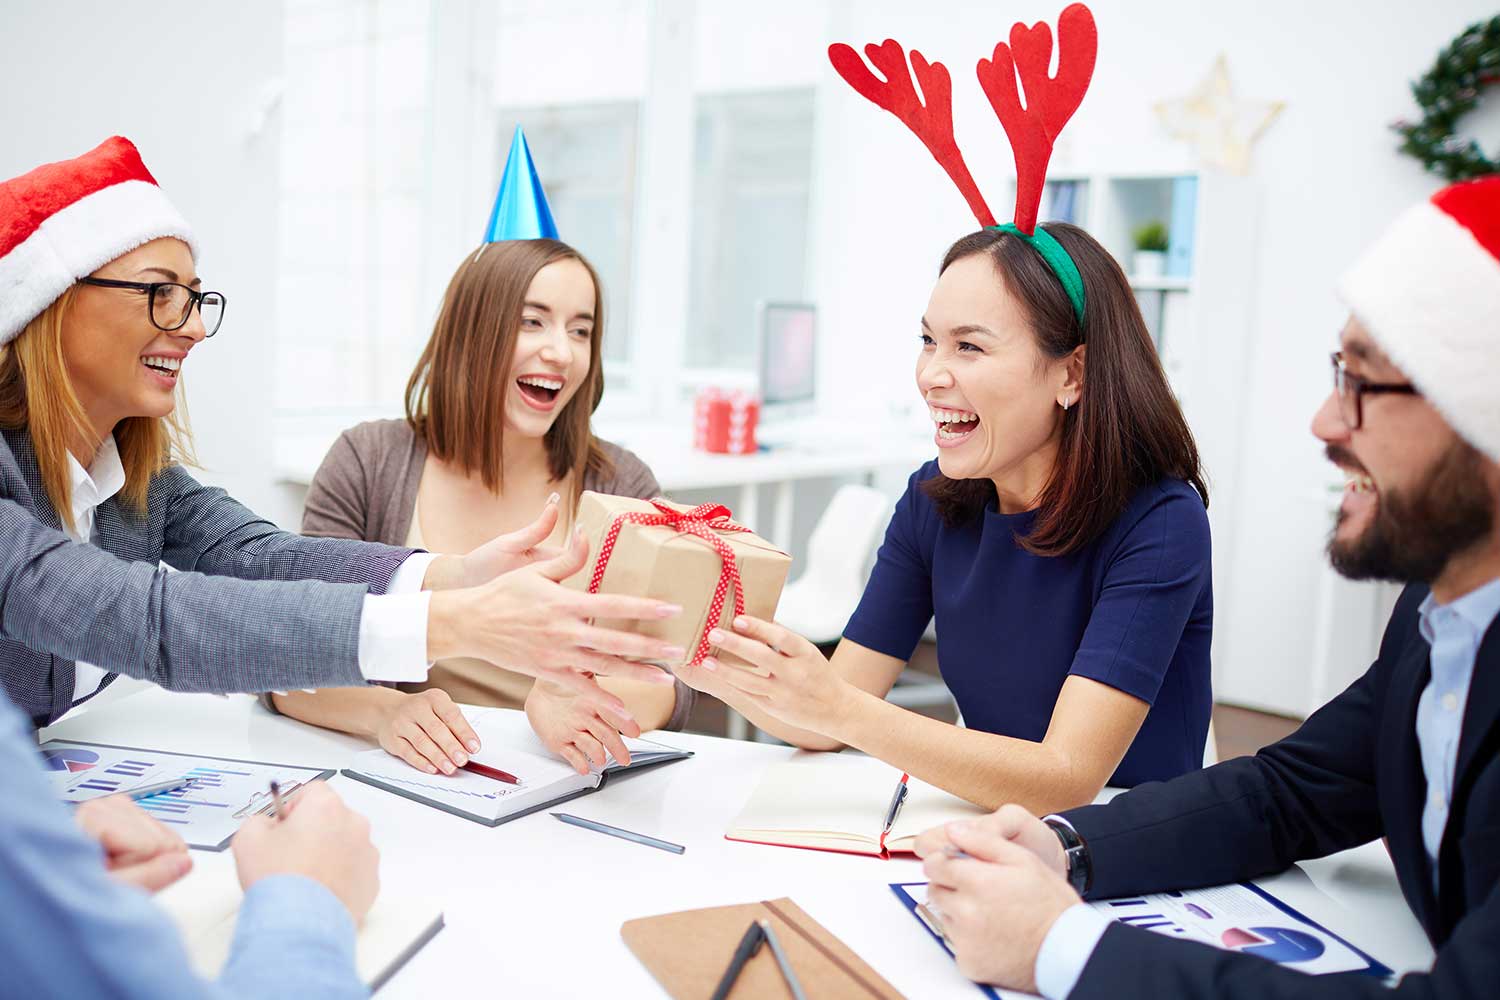 Four people wearing holiday headgear sit around a conference table.